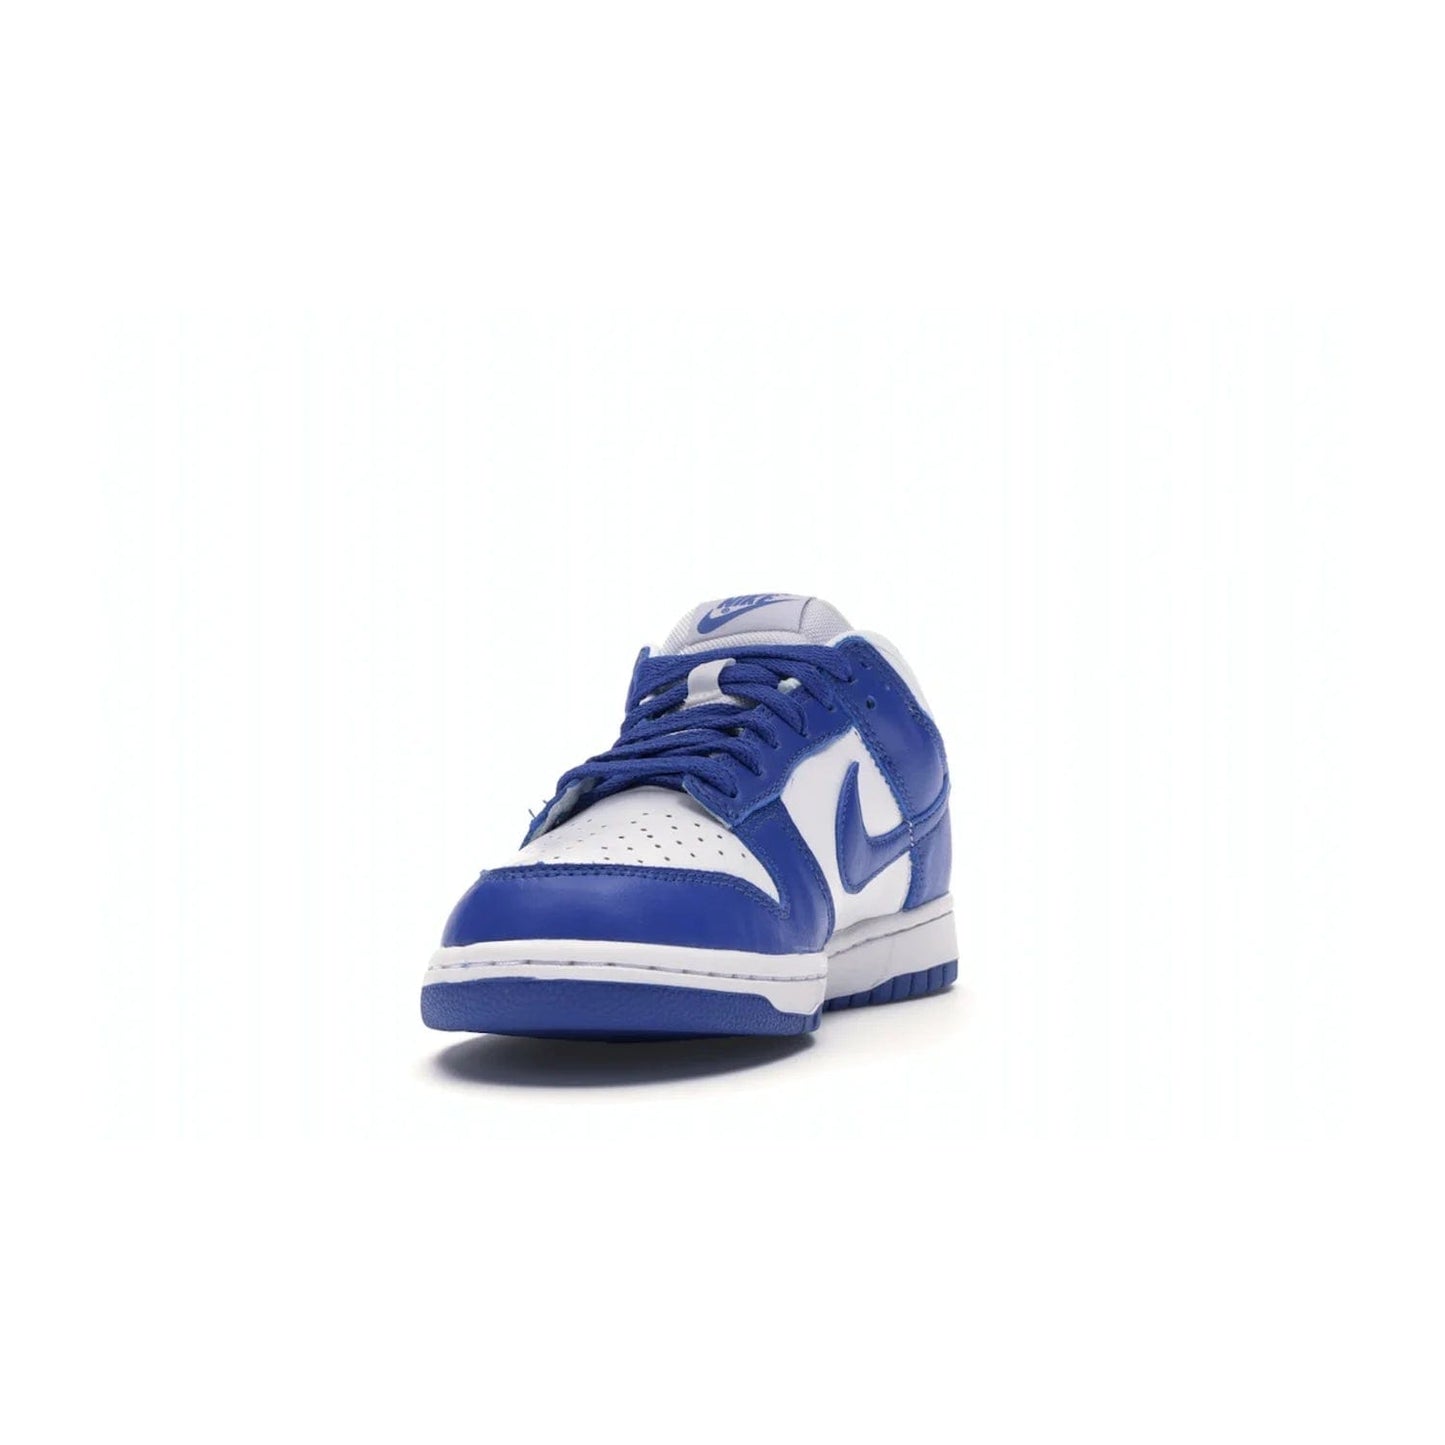 Nike Dunk Low SP Kentucky (2020/2022) - Image 12 - Only at www.BallersClubKickz.com - Classic Nike Dunk Low SP Kentucky with timeless White/Varsity Royal colorway. White leather upper, royal outsole, and Nike branding. A hit since March 2020 homage to the 1985 Nike College Colors program. Show your support with these classic kicks.